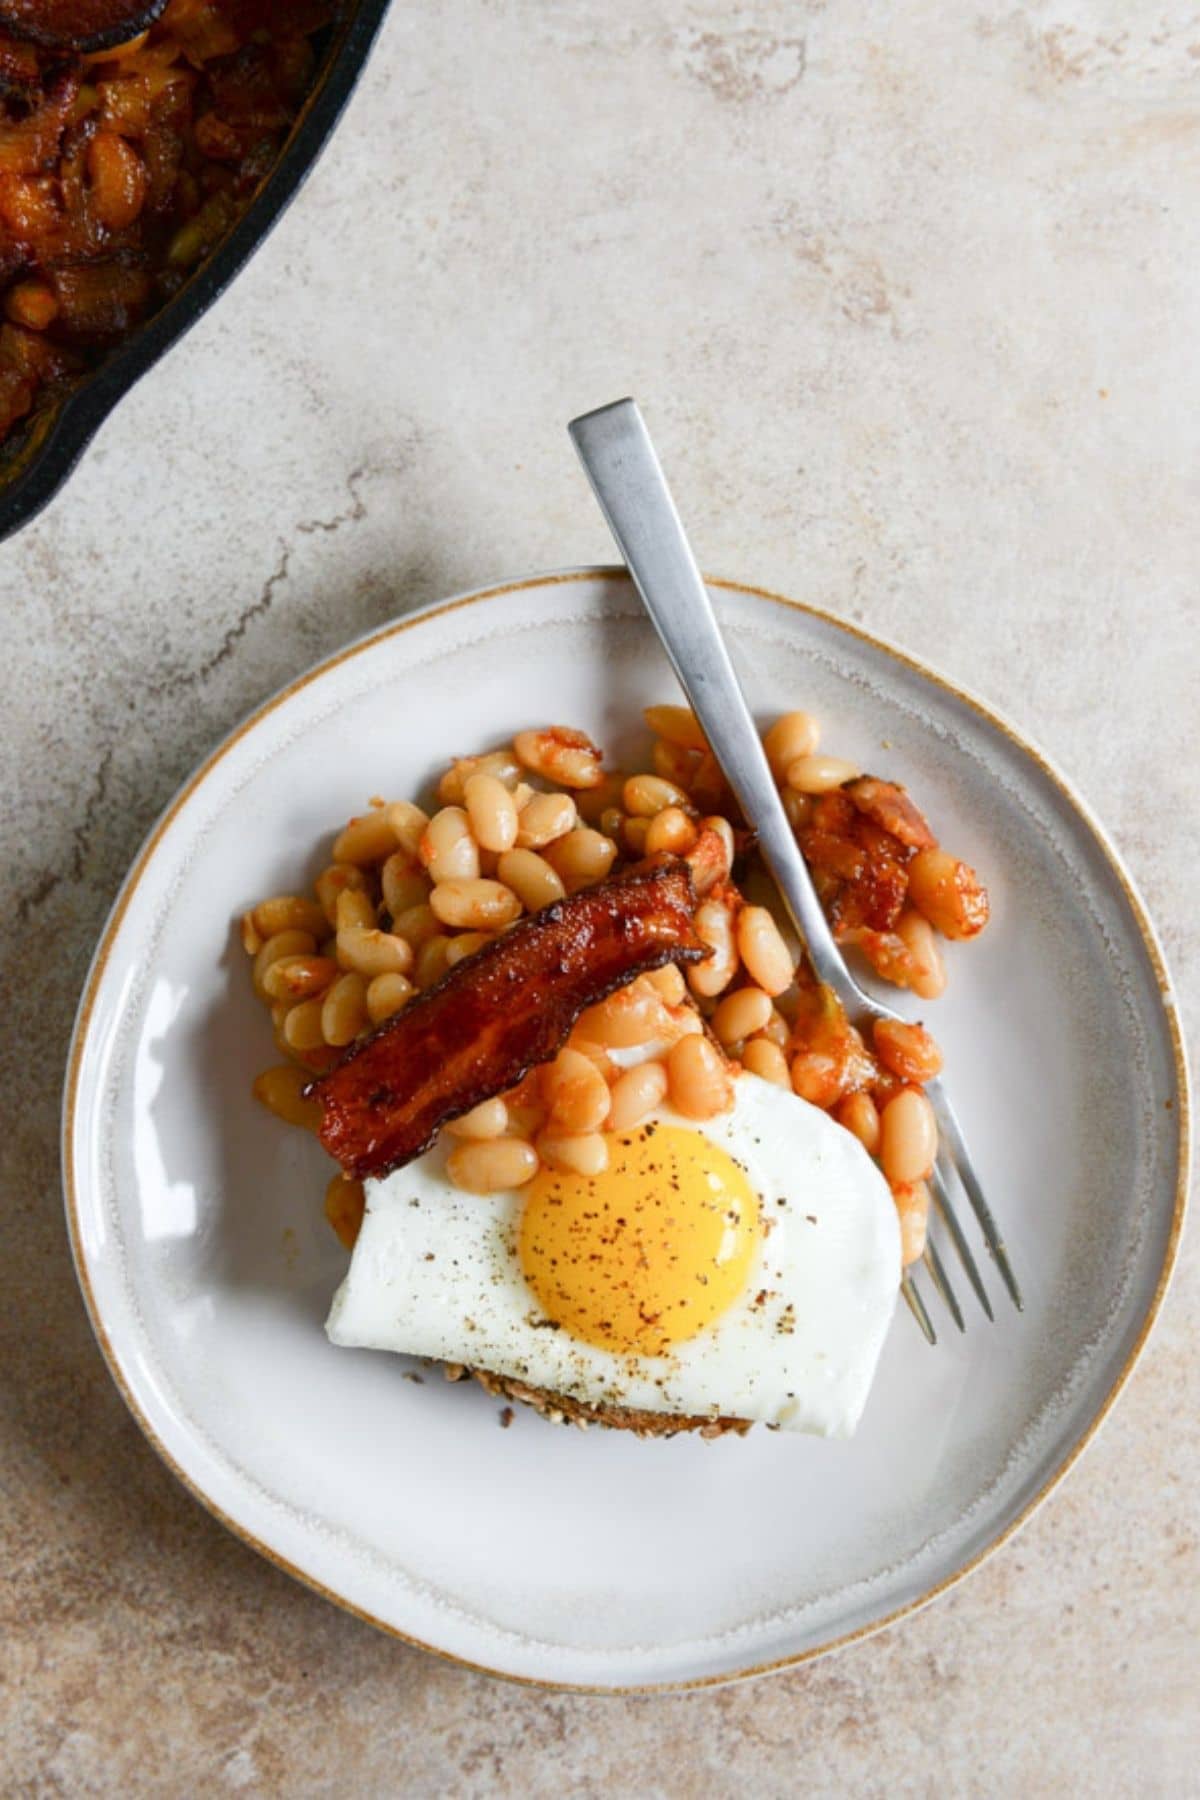 whiet plate with toast egg and beans